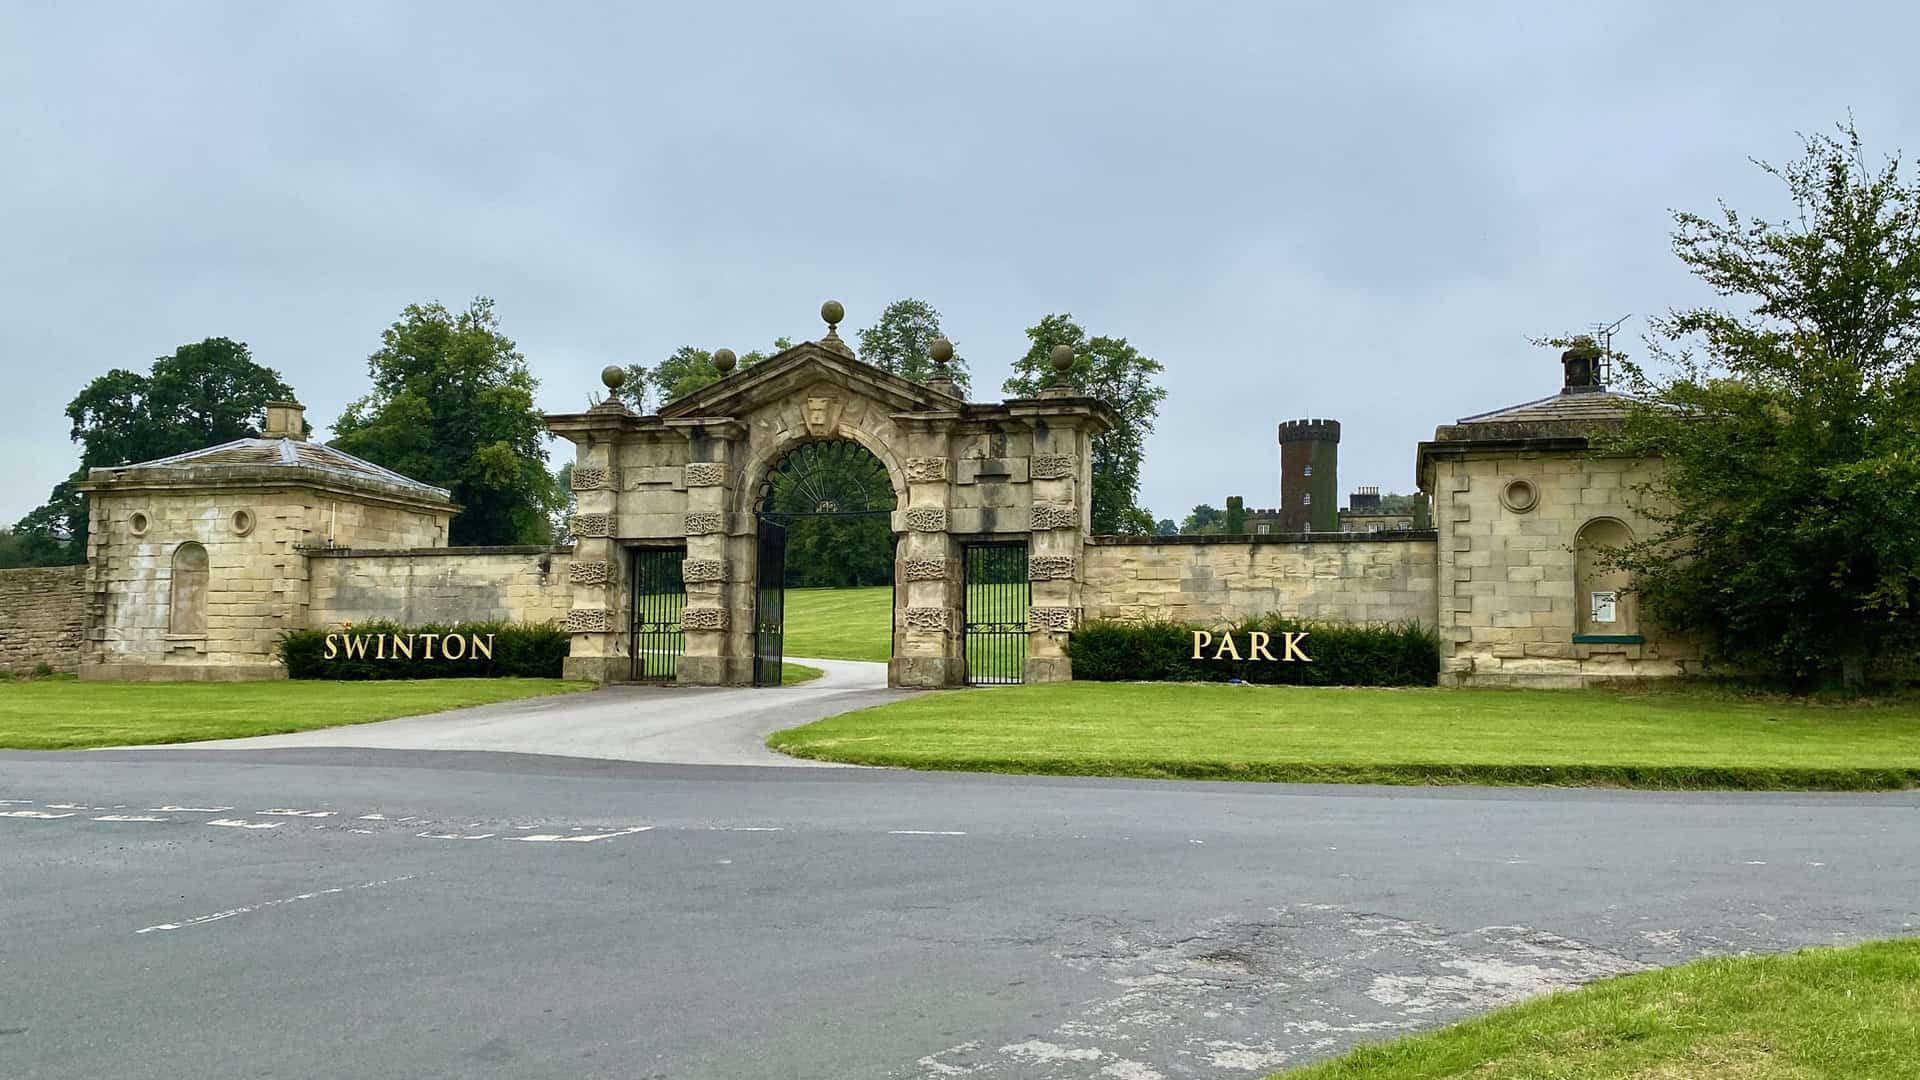 The grand entrance to Swinton Park offers a gateway to elegance.